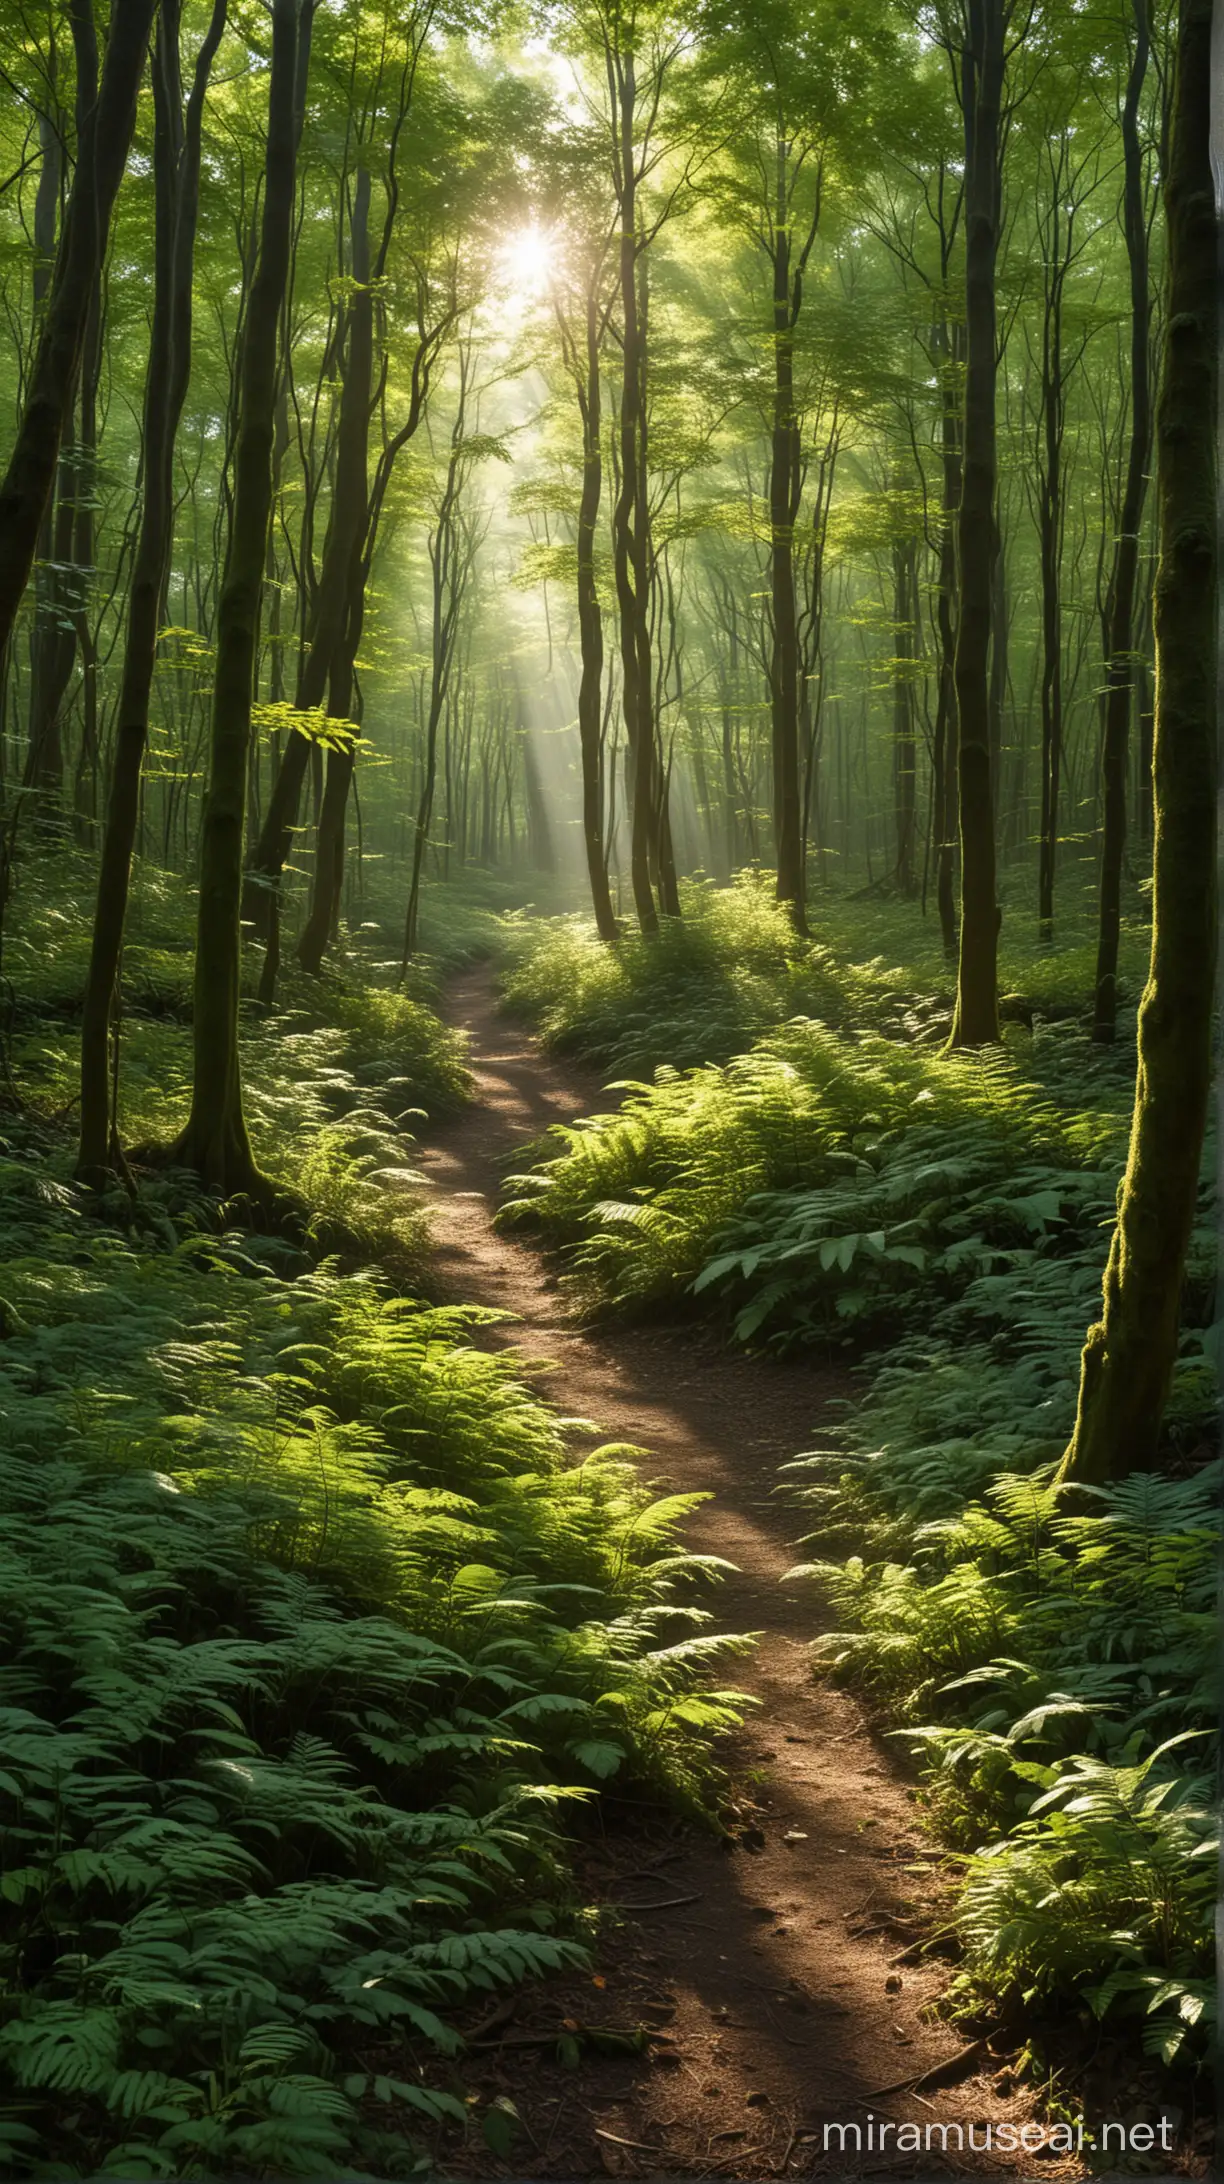 a dense, beautiful green and mysterious forest with sunlight streaming through the thick canopy, illuminating the vibrant foliage and casting dappled shadows on the forest floor.